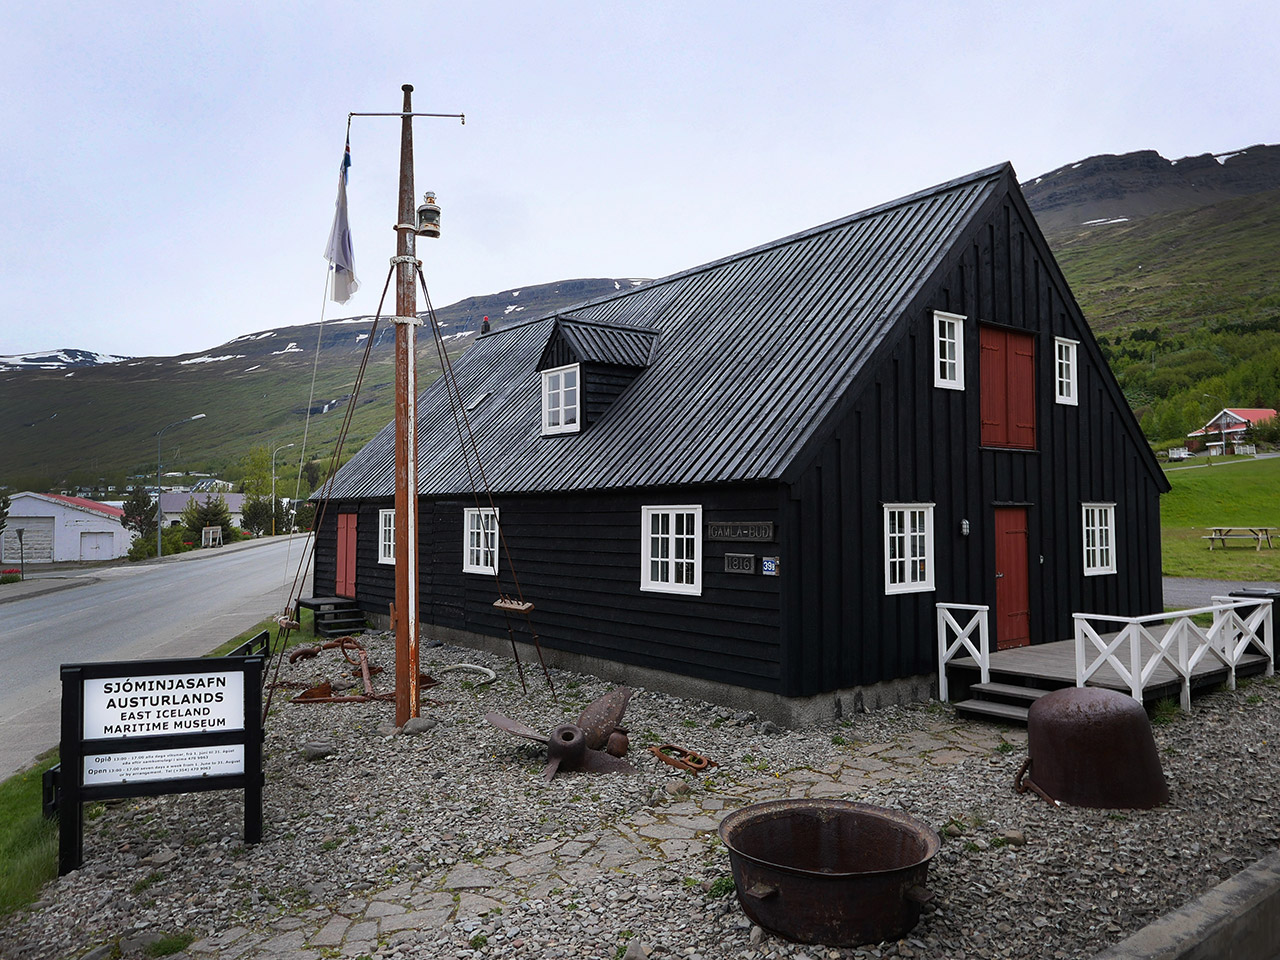 If you are interest in the history of seamen visit the Maritime museum in Eskifjörður